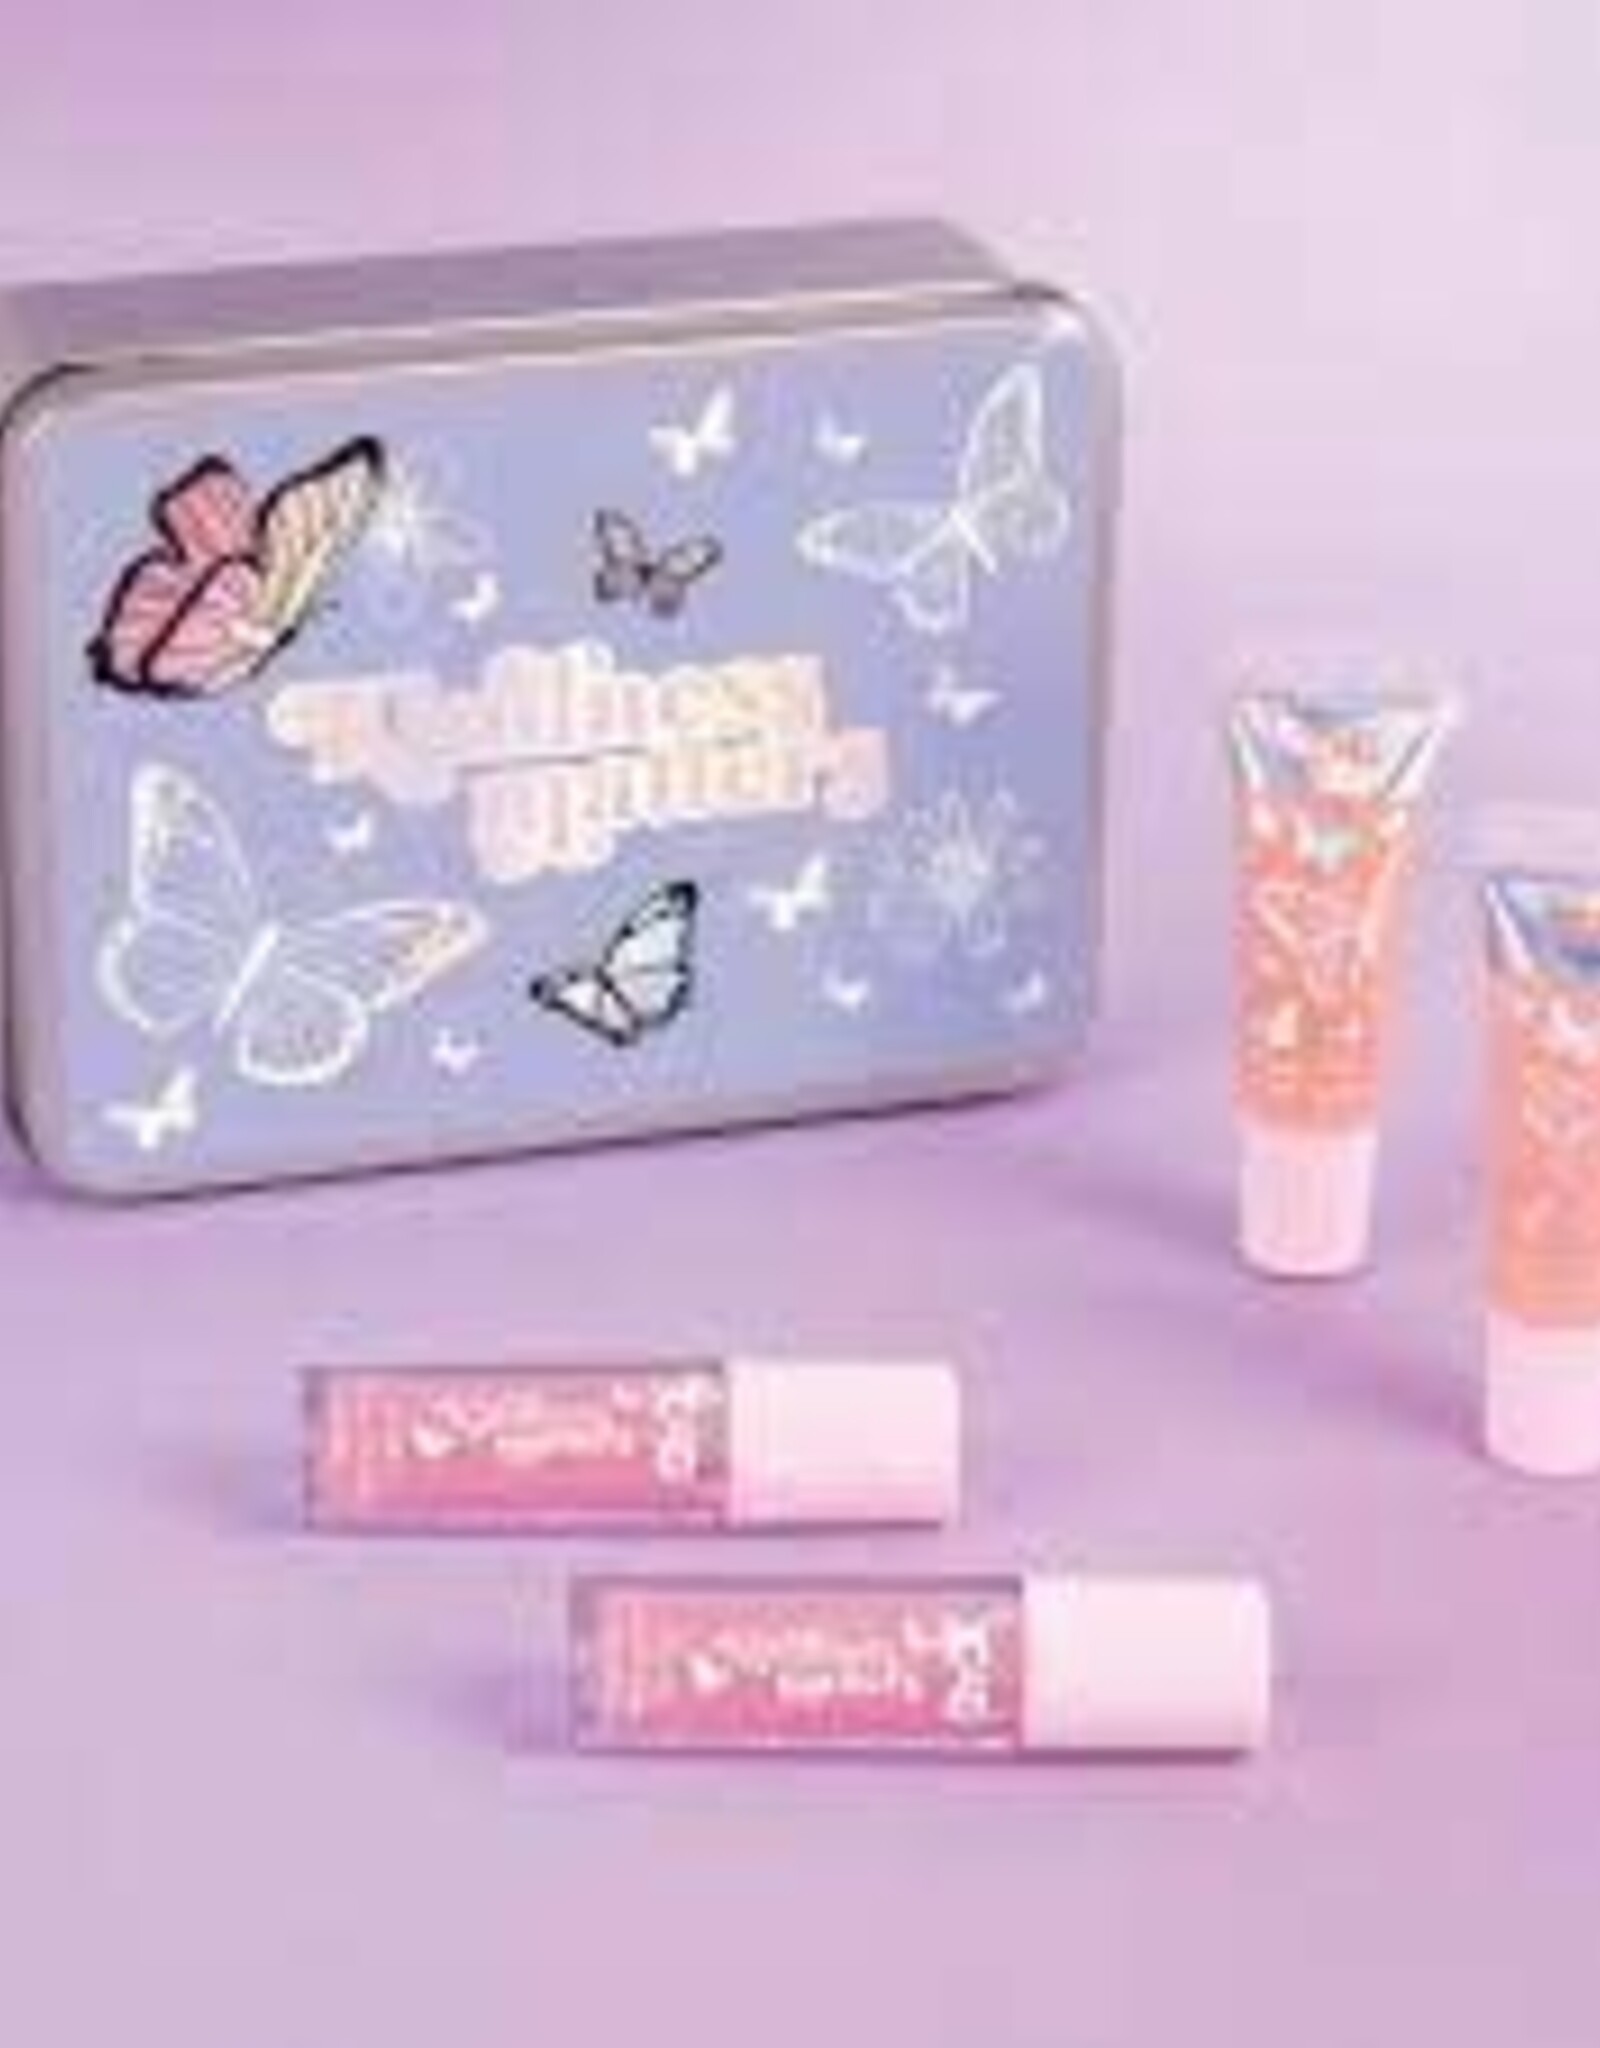 Make It Real 3C4G Butterfly Kisses Lip Set